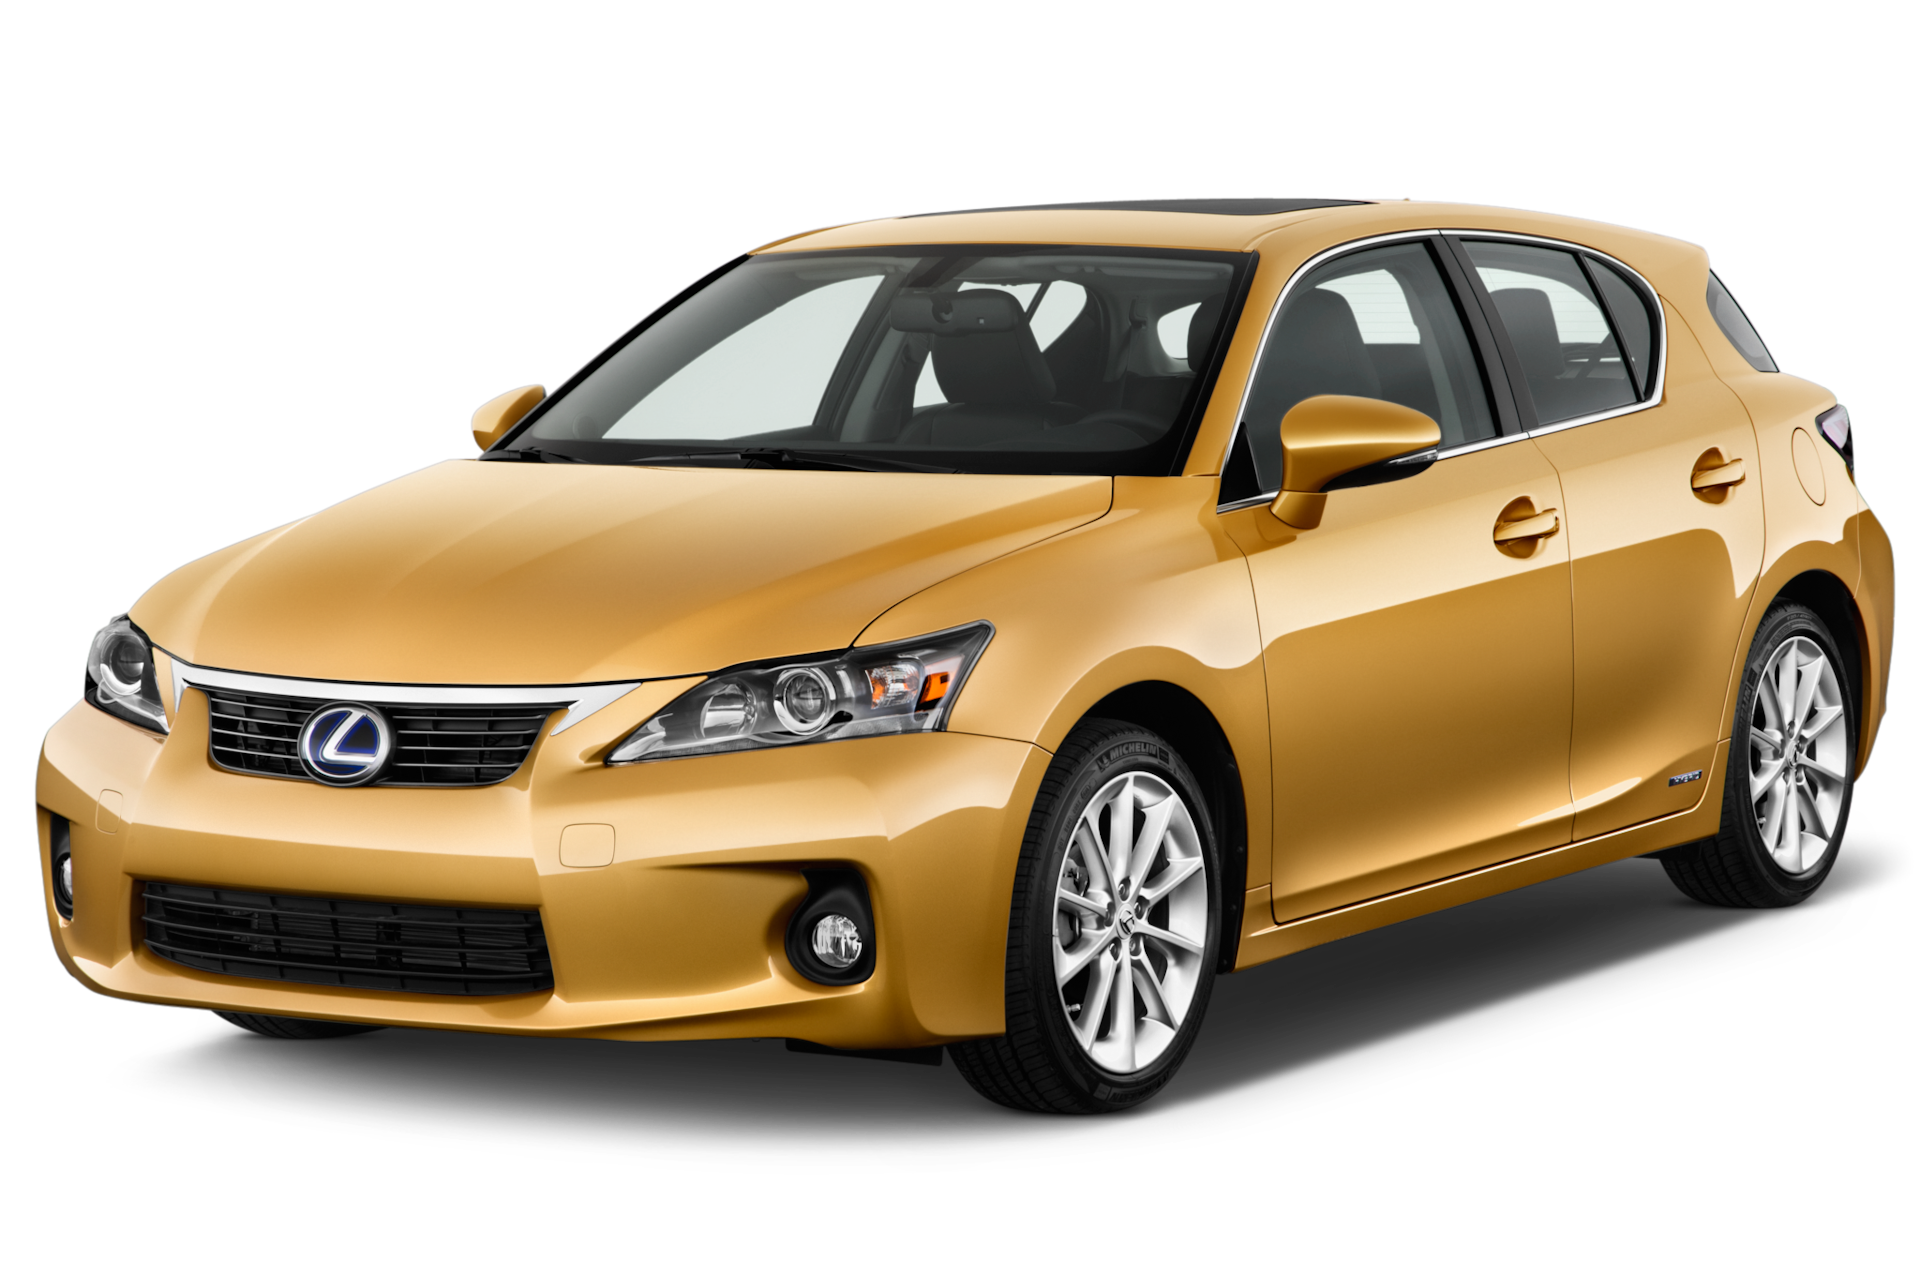 2012 Lexus CT 200h Prices, Reviews, and Photos - MotorTrend